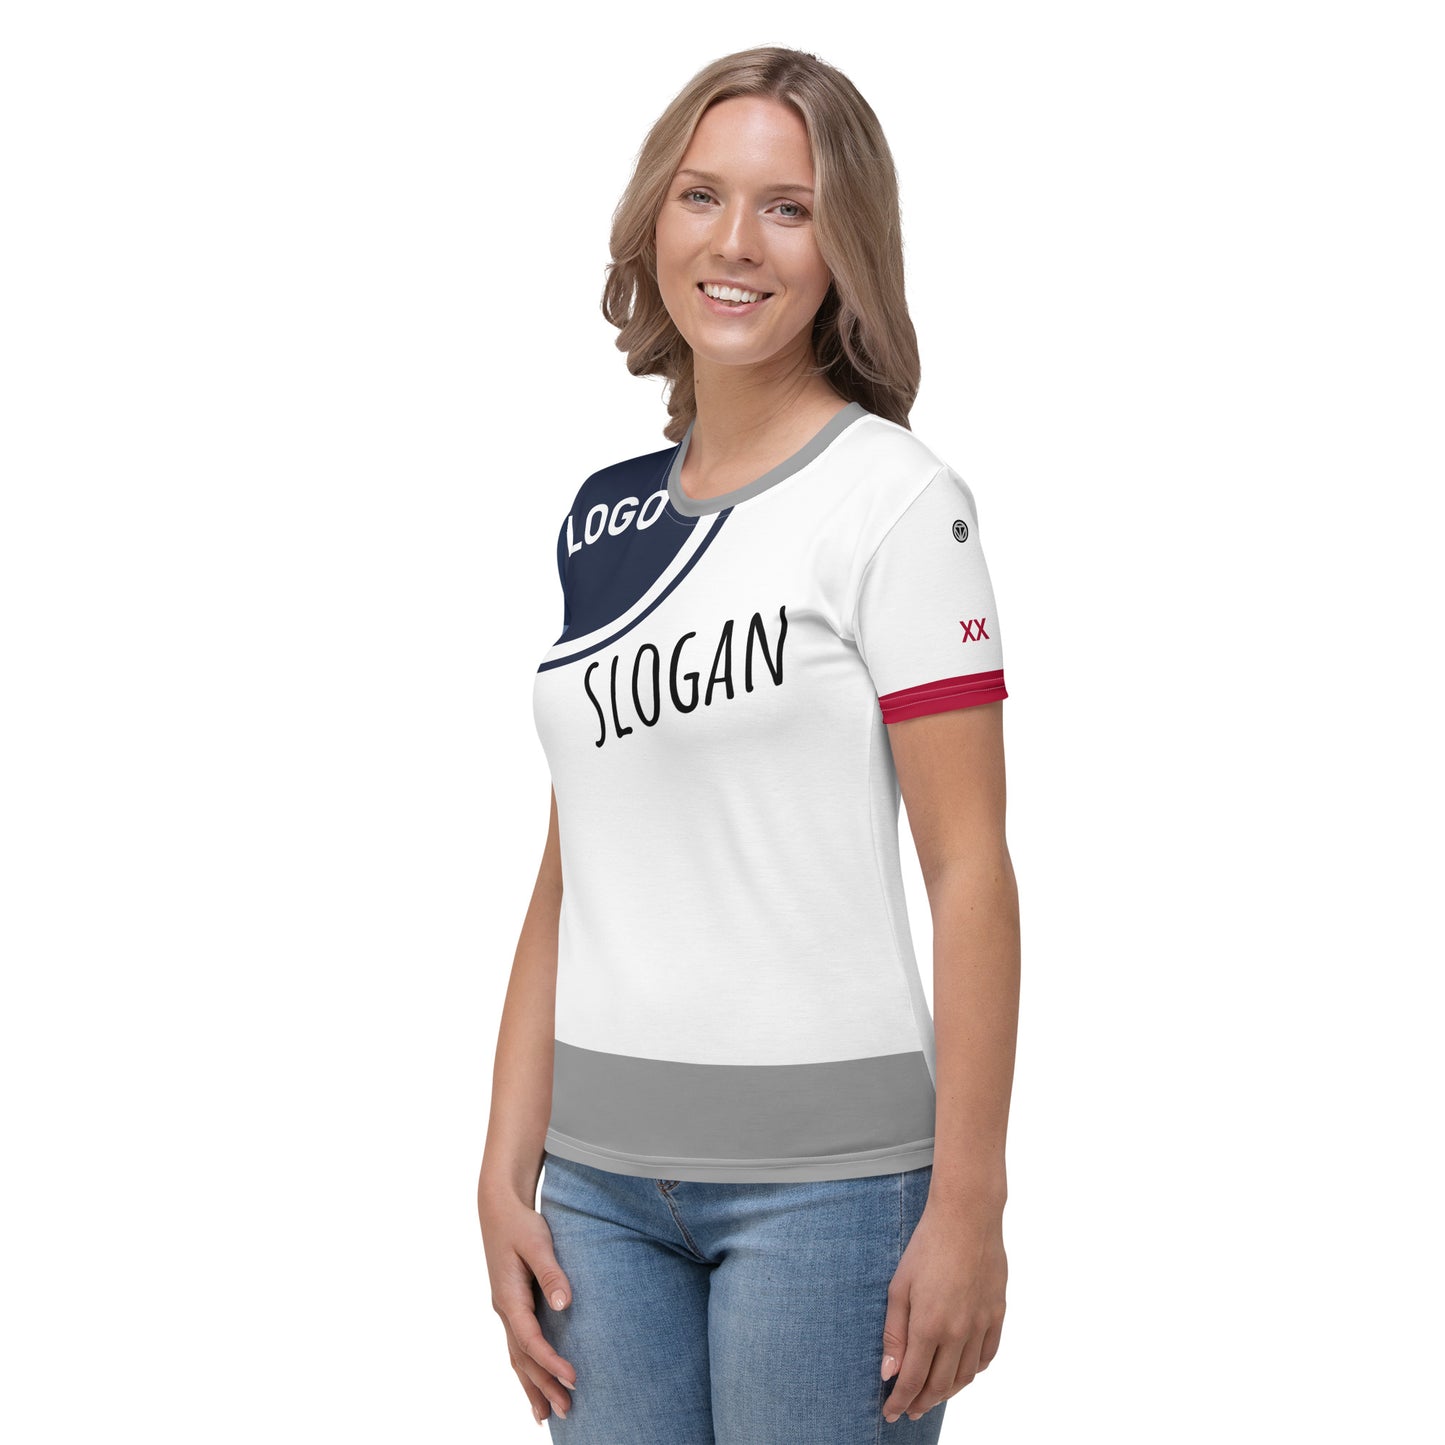 TIME OF VIBES - Women's T-shirt CORPORATE - €49.00